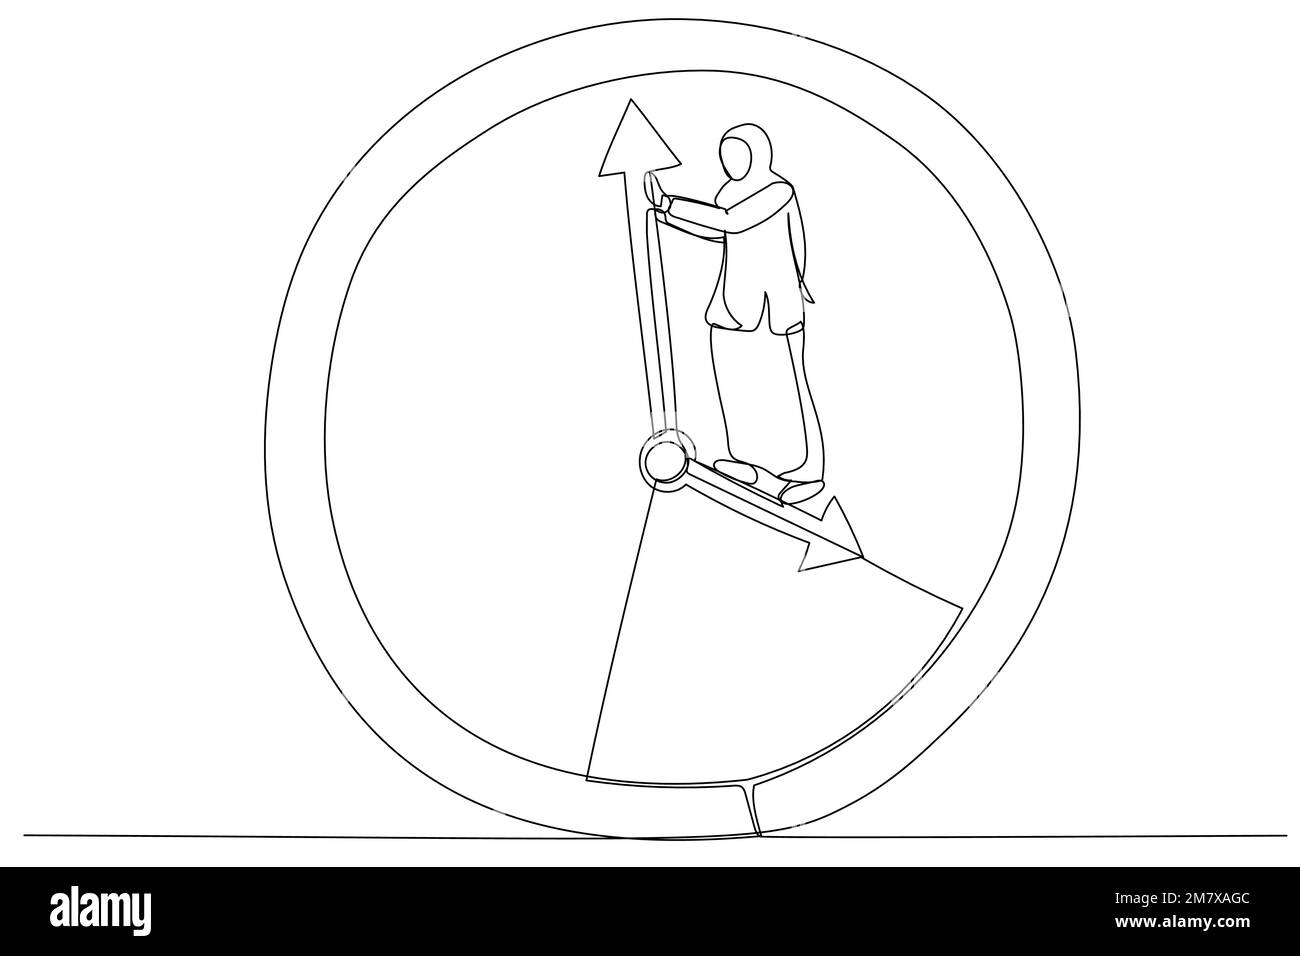 Cartoon of muslim businesswoman standing on clock hour hand manage to push back minute. Turn back time metaphor. Single continuous line art style Stock Vector